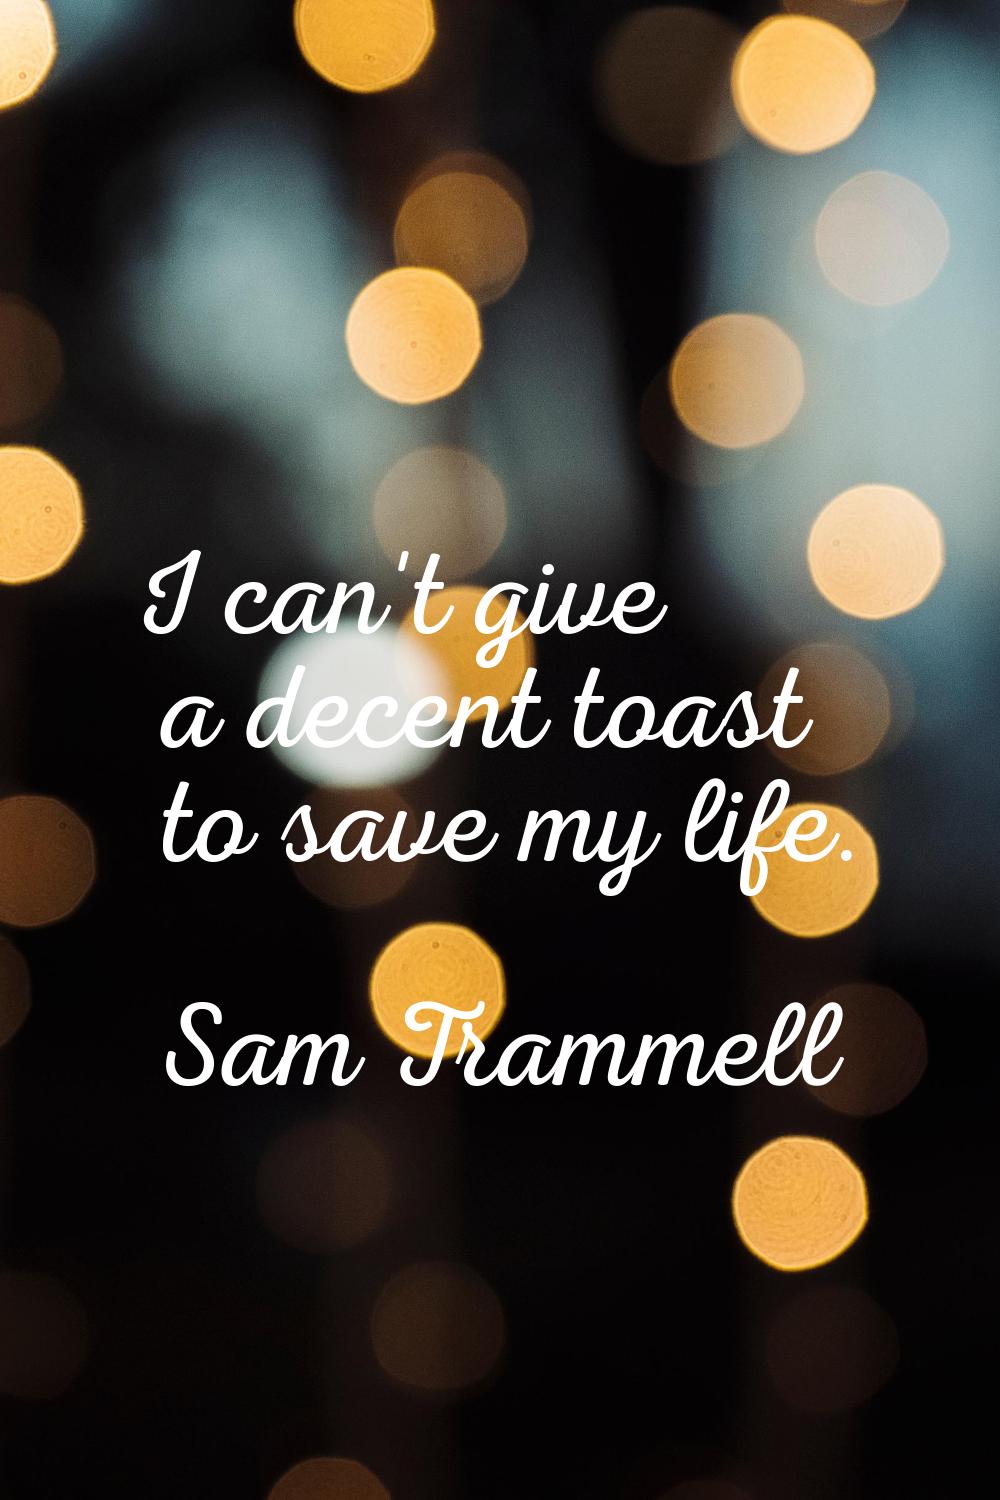 I can't give a decent toast to save my life.